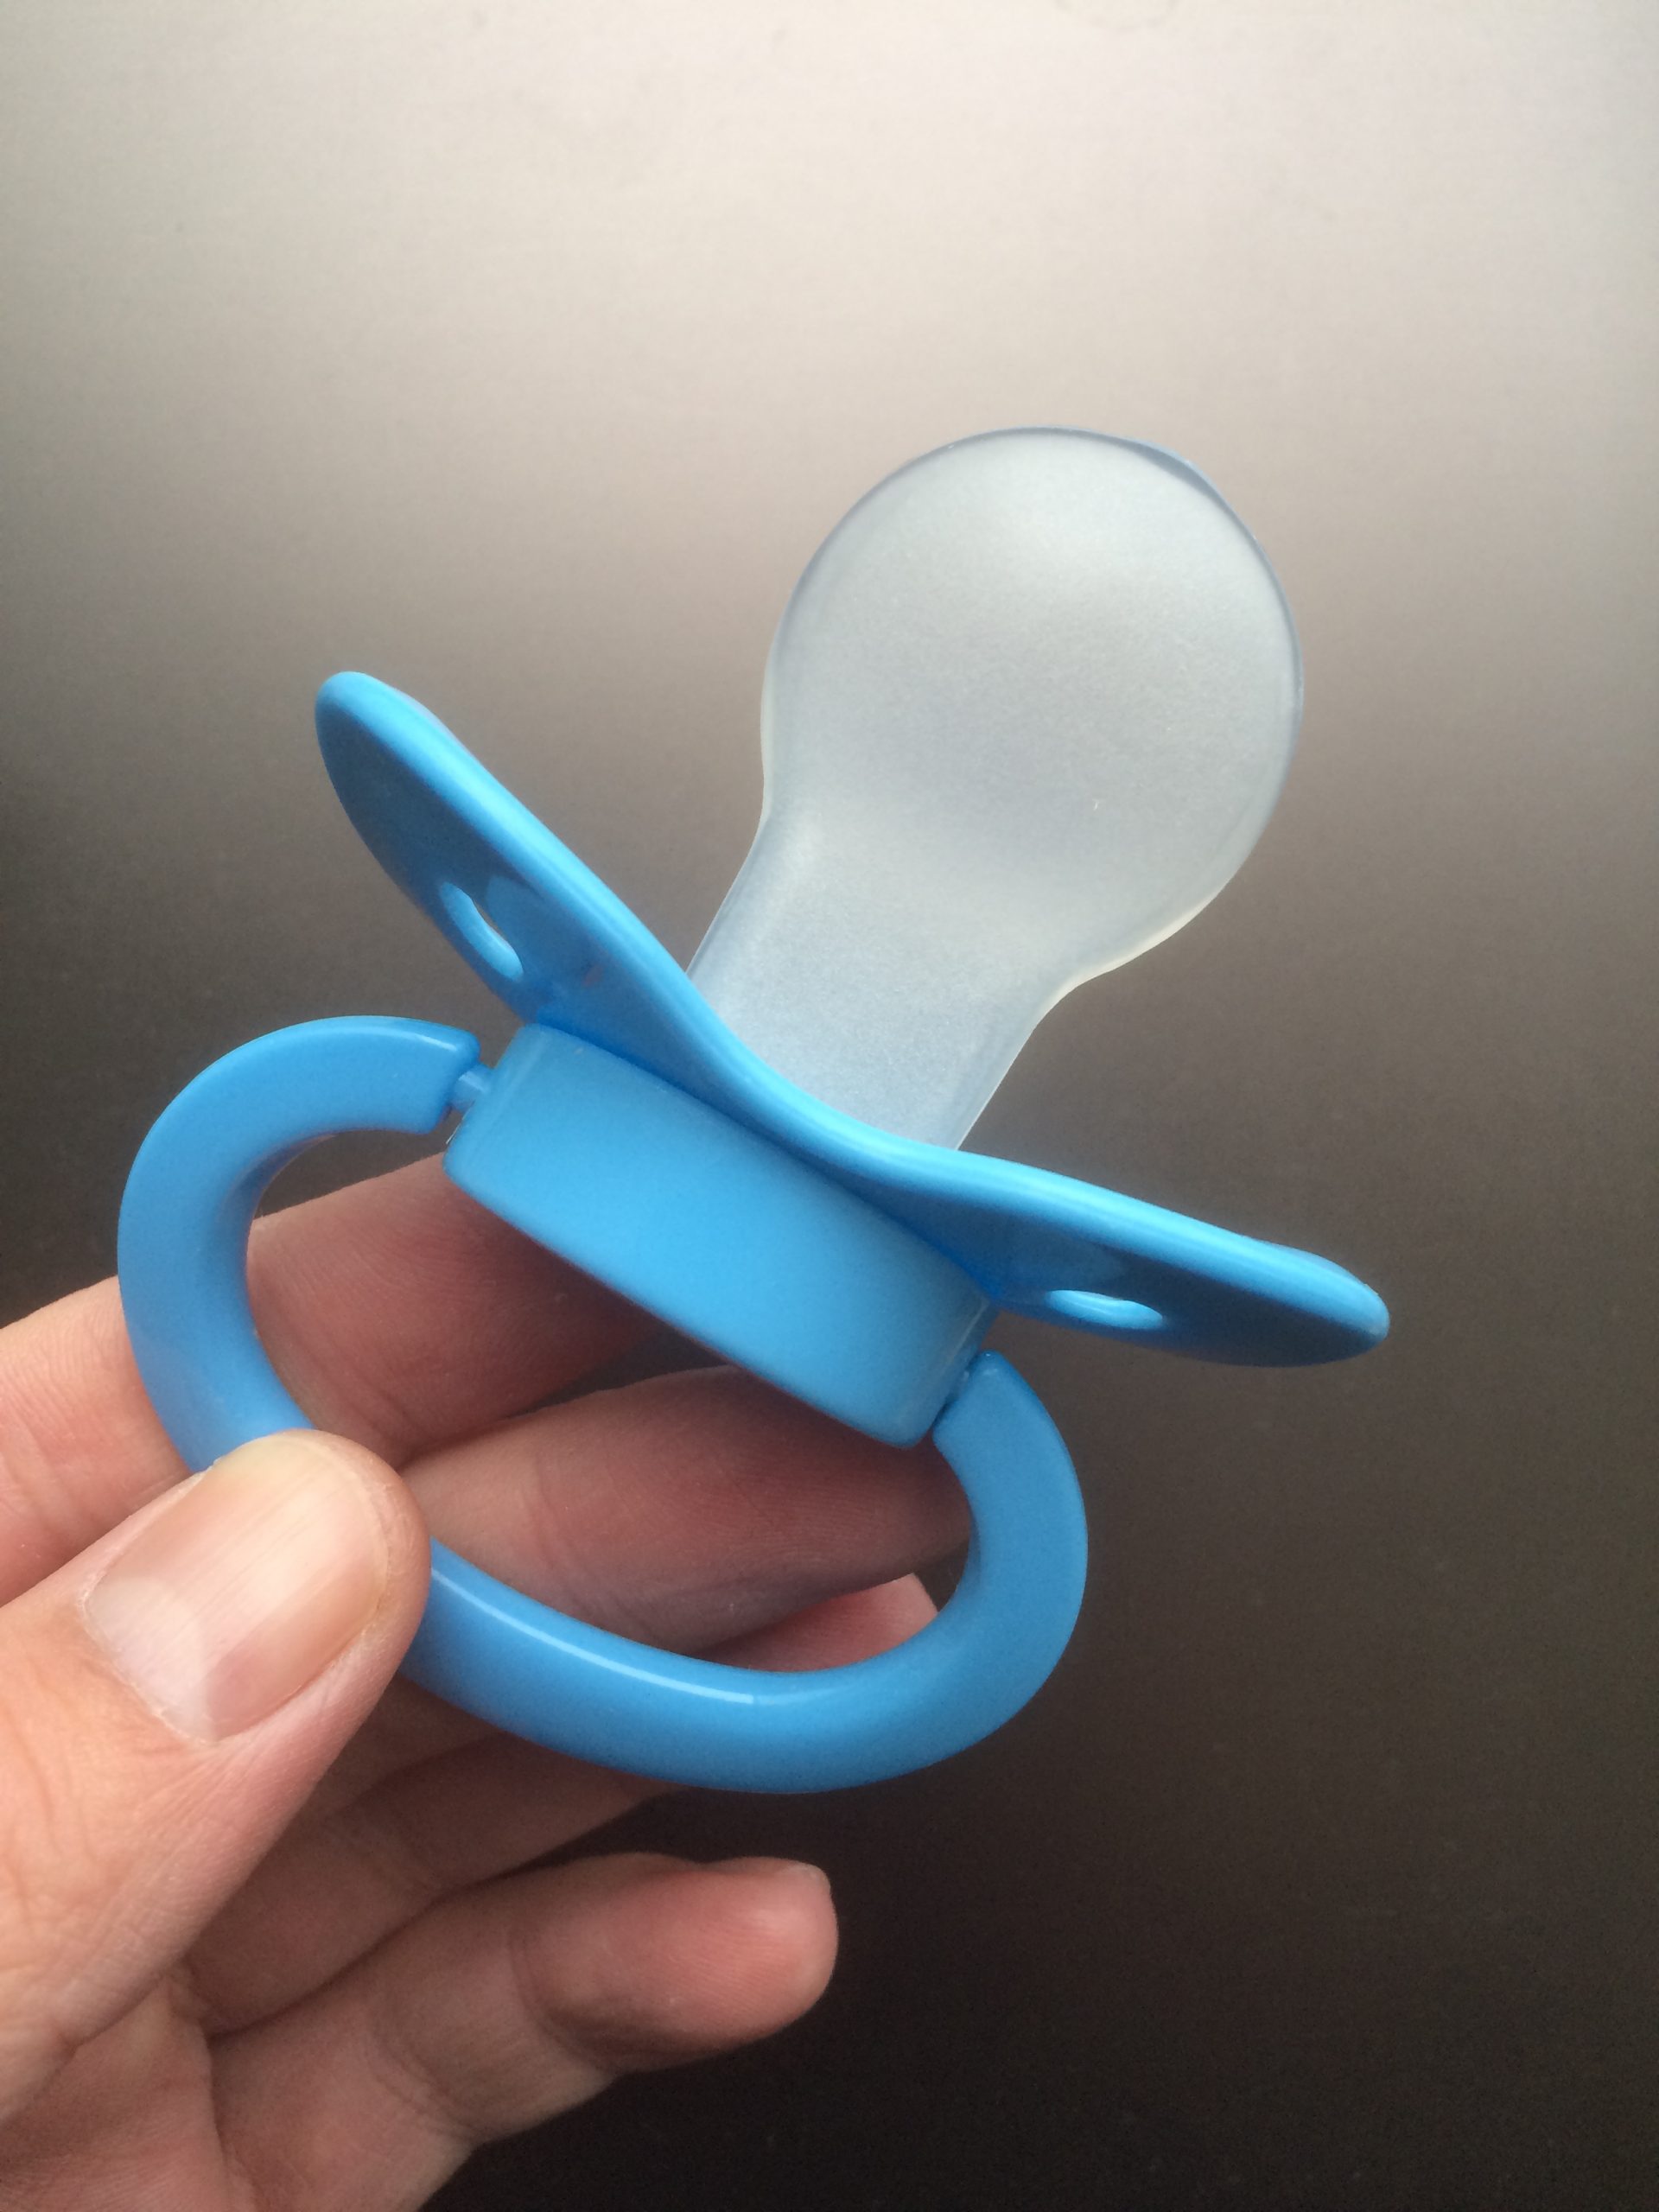 A blue pacifier in front of a grey background.